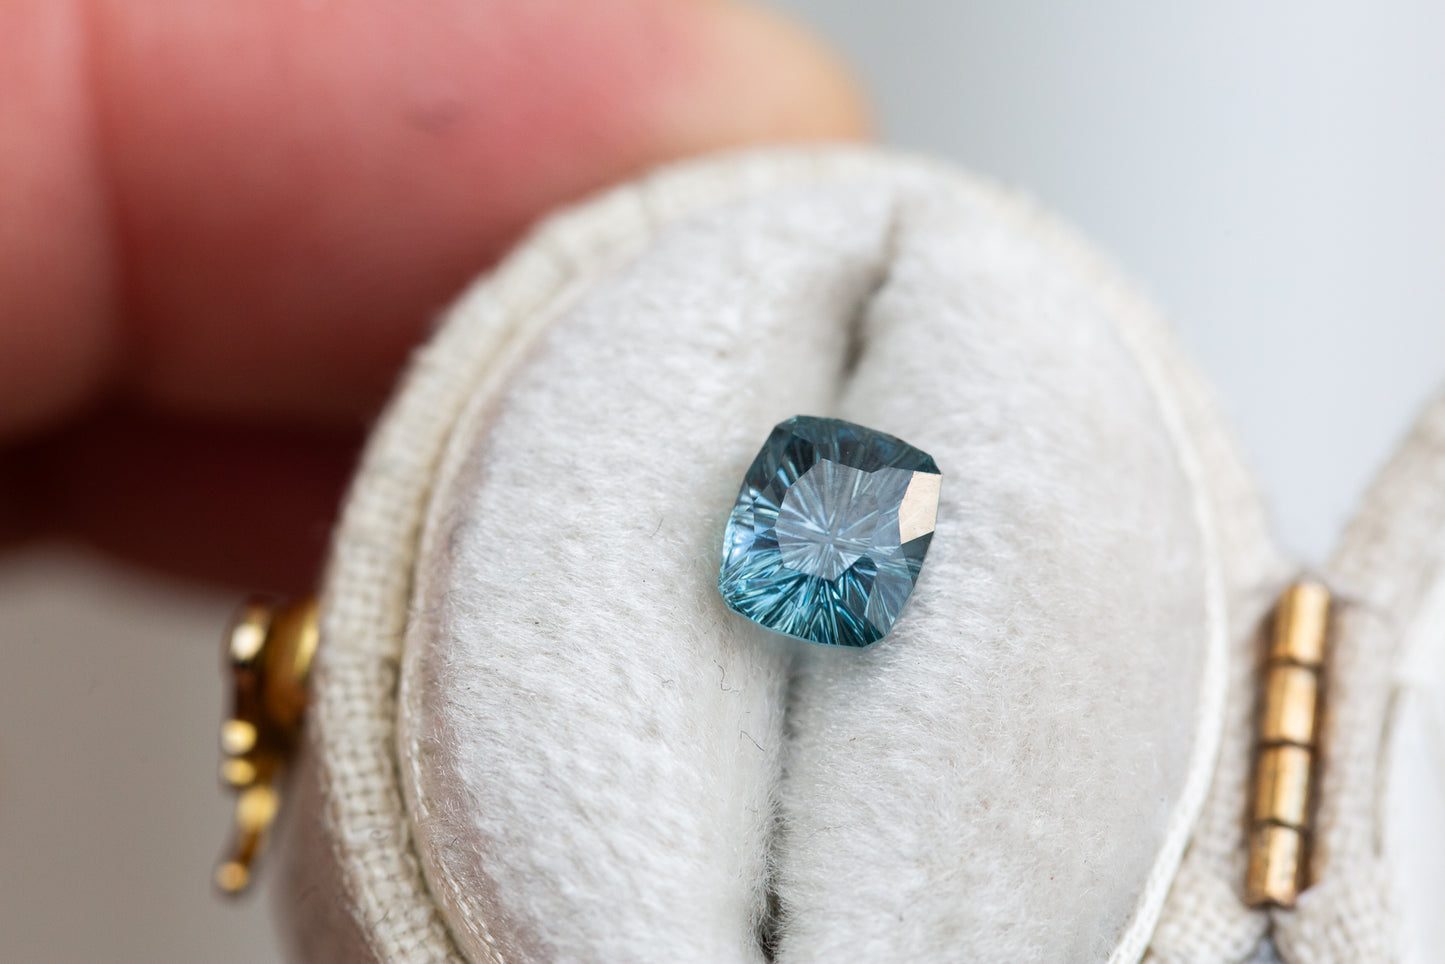 Load image into Gallery viewer, 1.42ct cushion cut teal blue sapphire- Starbrite cut by John Dyer
